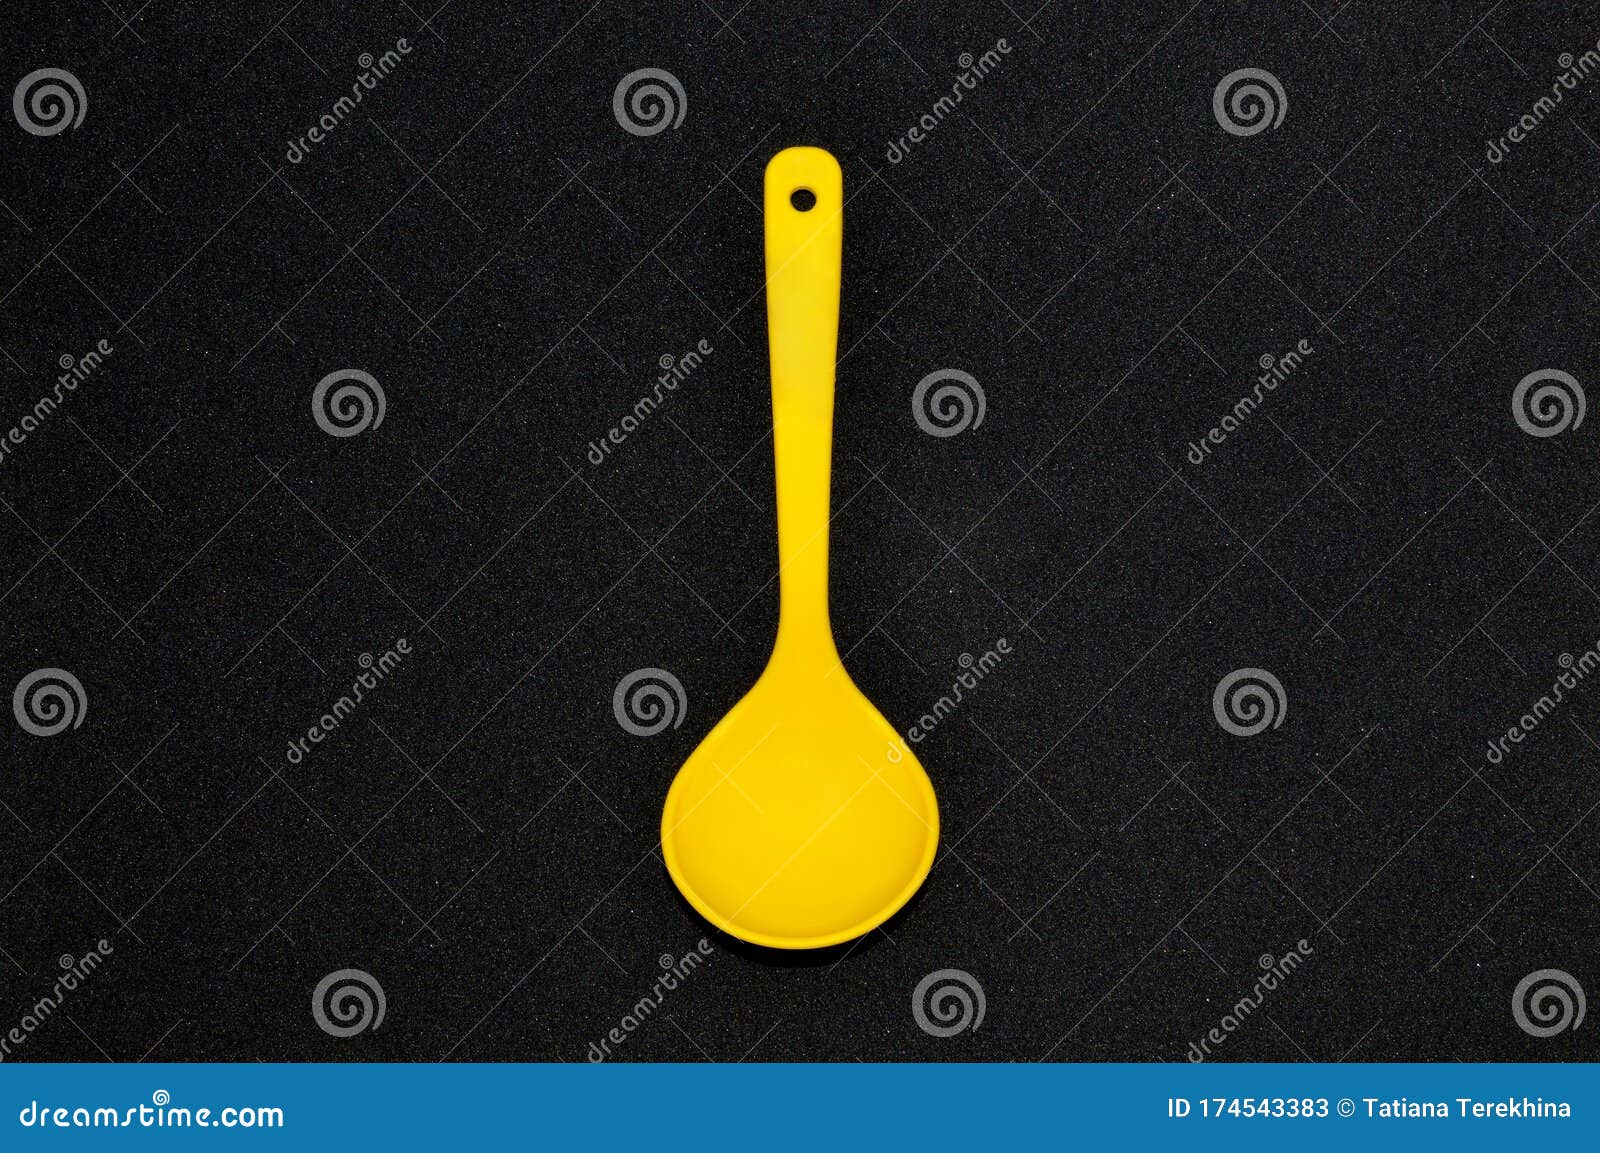 Download Yellow Plastic Kitchen Spoon Or Soup Ladle Isolated On Black Background Stock Image Image Of Clean Chef 174543383 Yellowimages Mockups